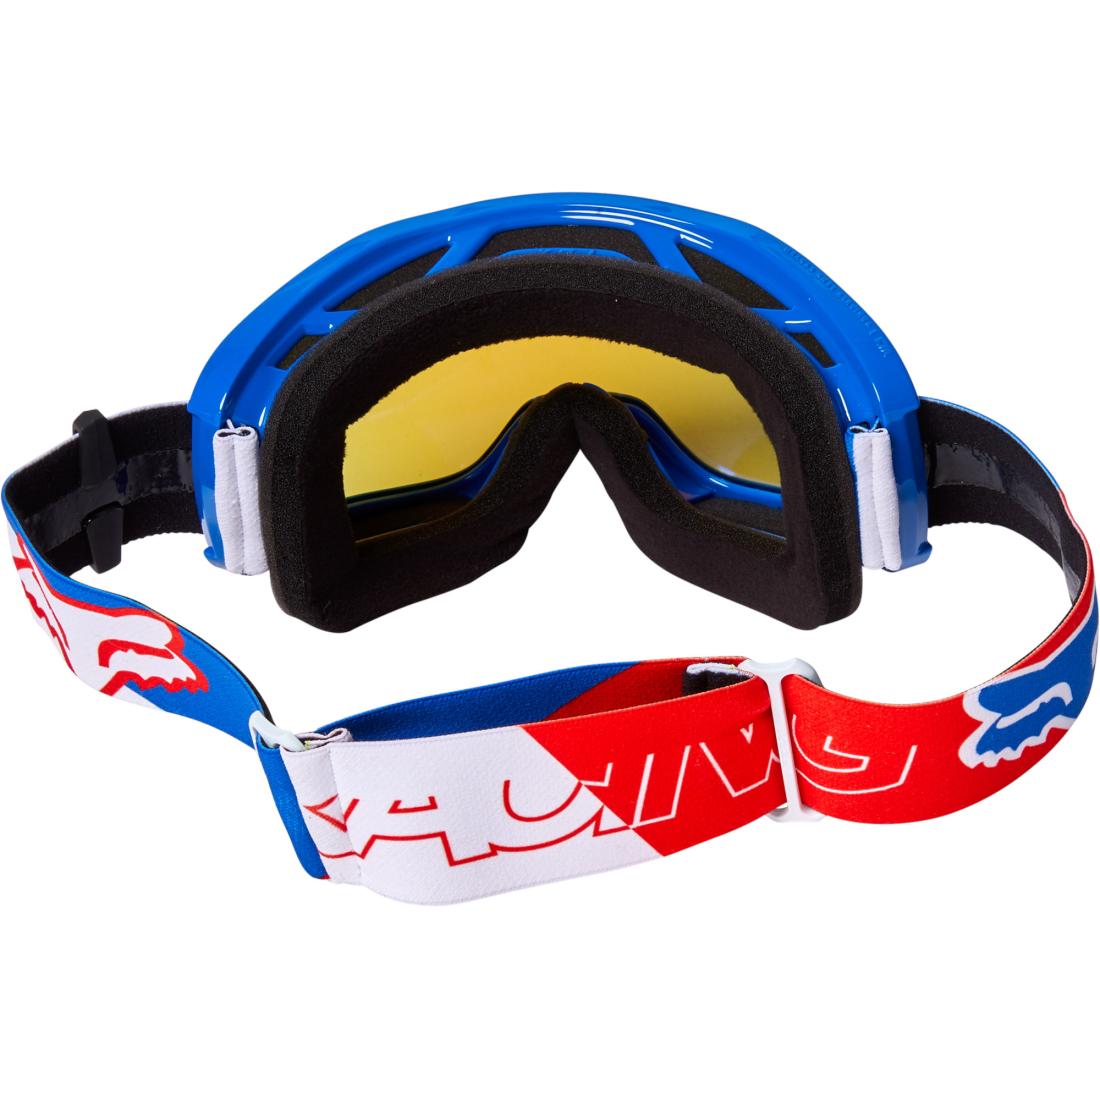 Main Skew Goggle - Spark White/Red/Blue